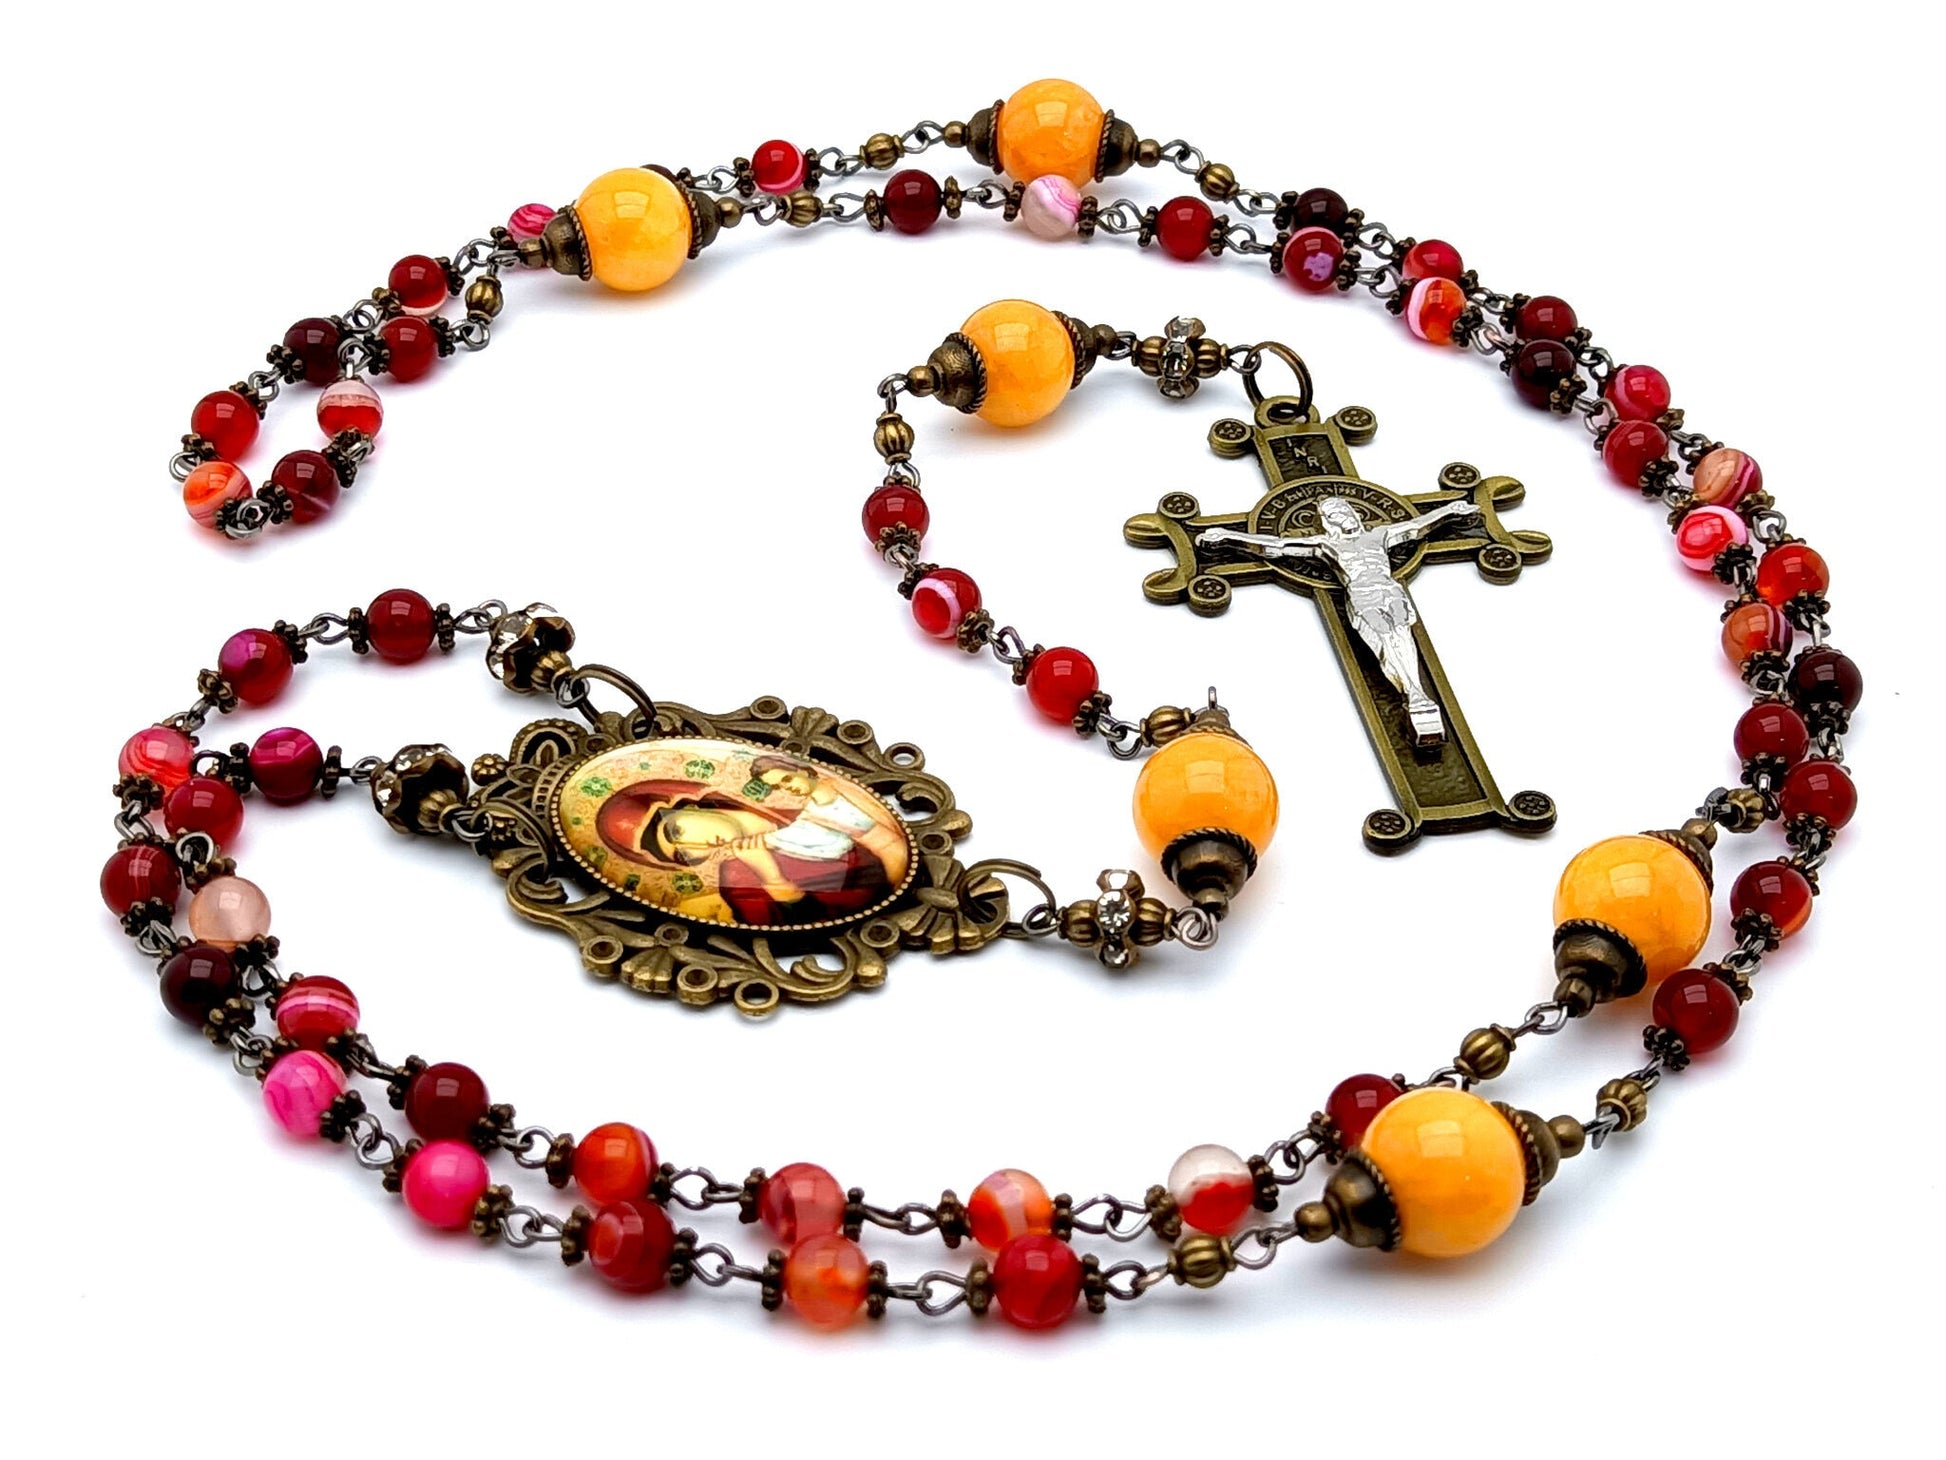 Our Lady of Perpetual Help unique rosary beads agate and jade vintage style gemstone vintage style rosary beads with bronze Saint Benedict crucifix.